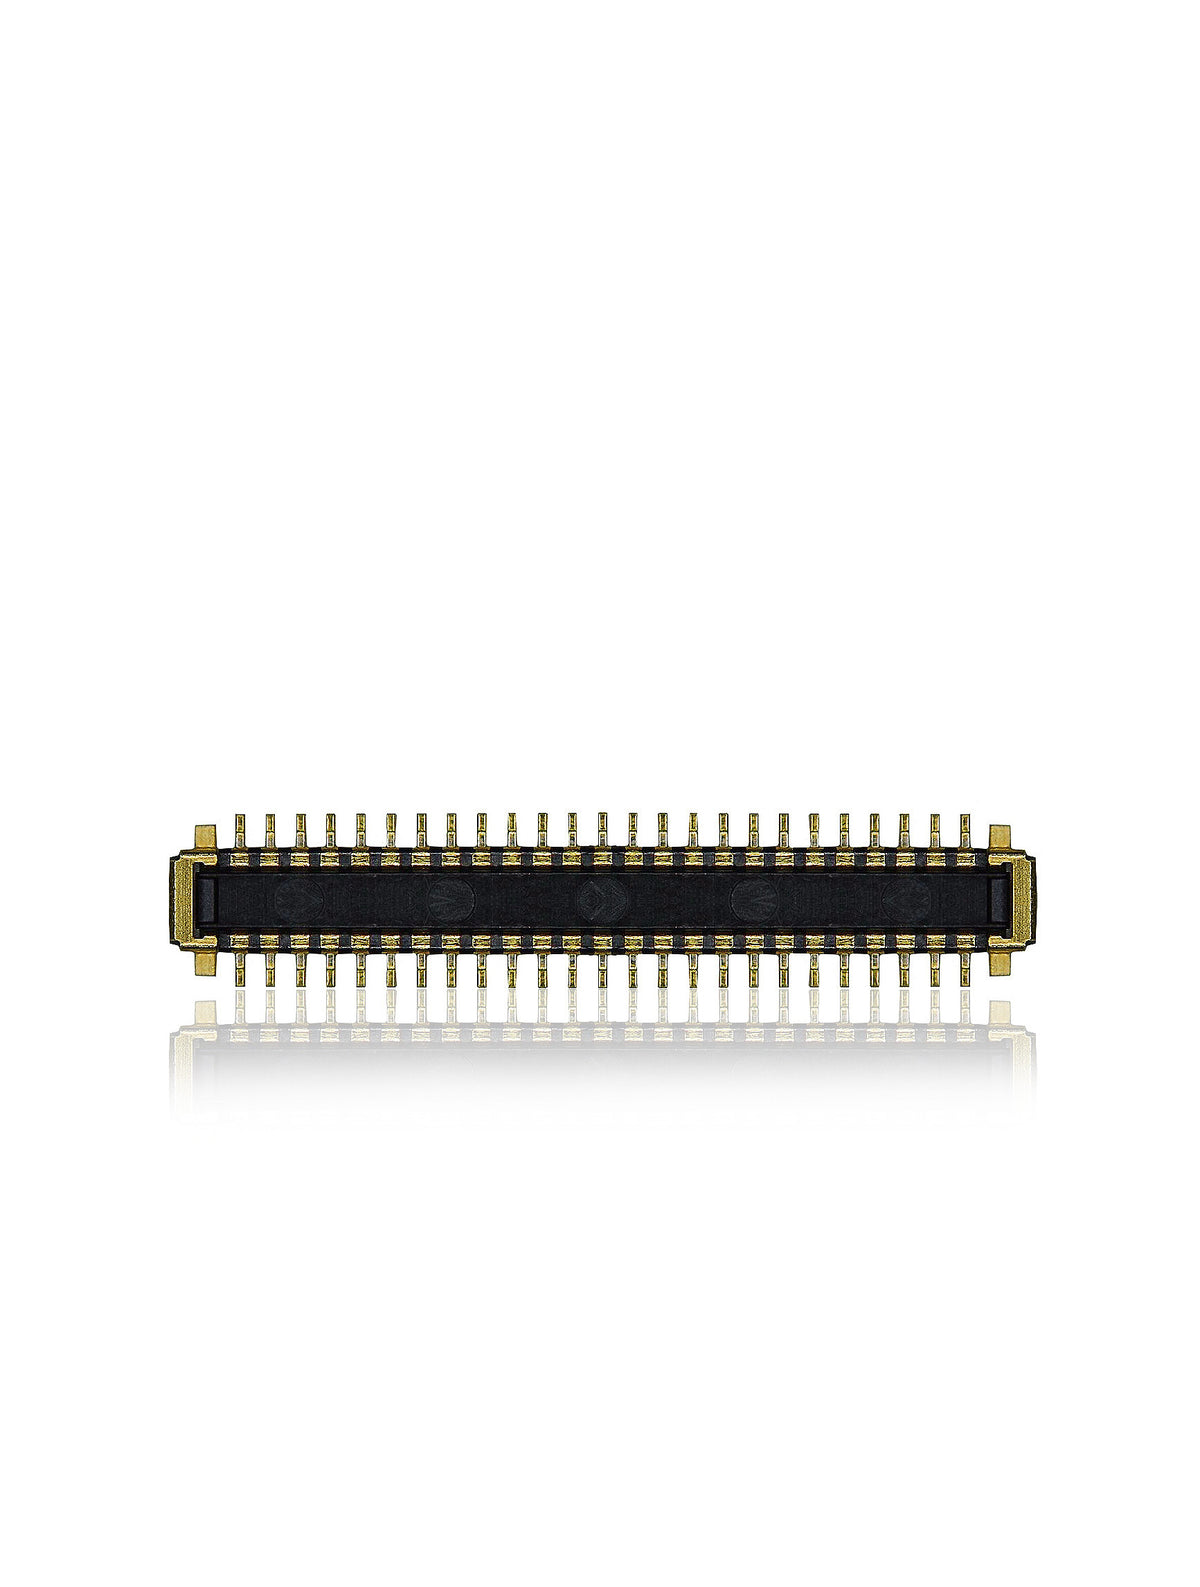 LCD (ON THE LCD FLEX NOT THE MOTHERBOARD) FPC CONNECTOR (50 PIN) FOR IPAD PRO 12.9" 2ND GEN (2017)